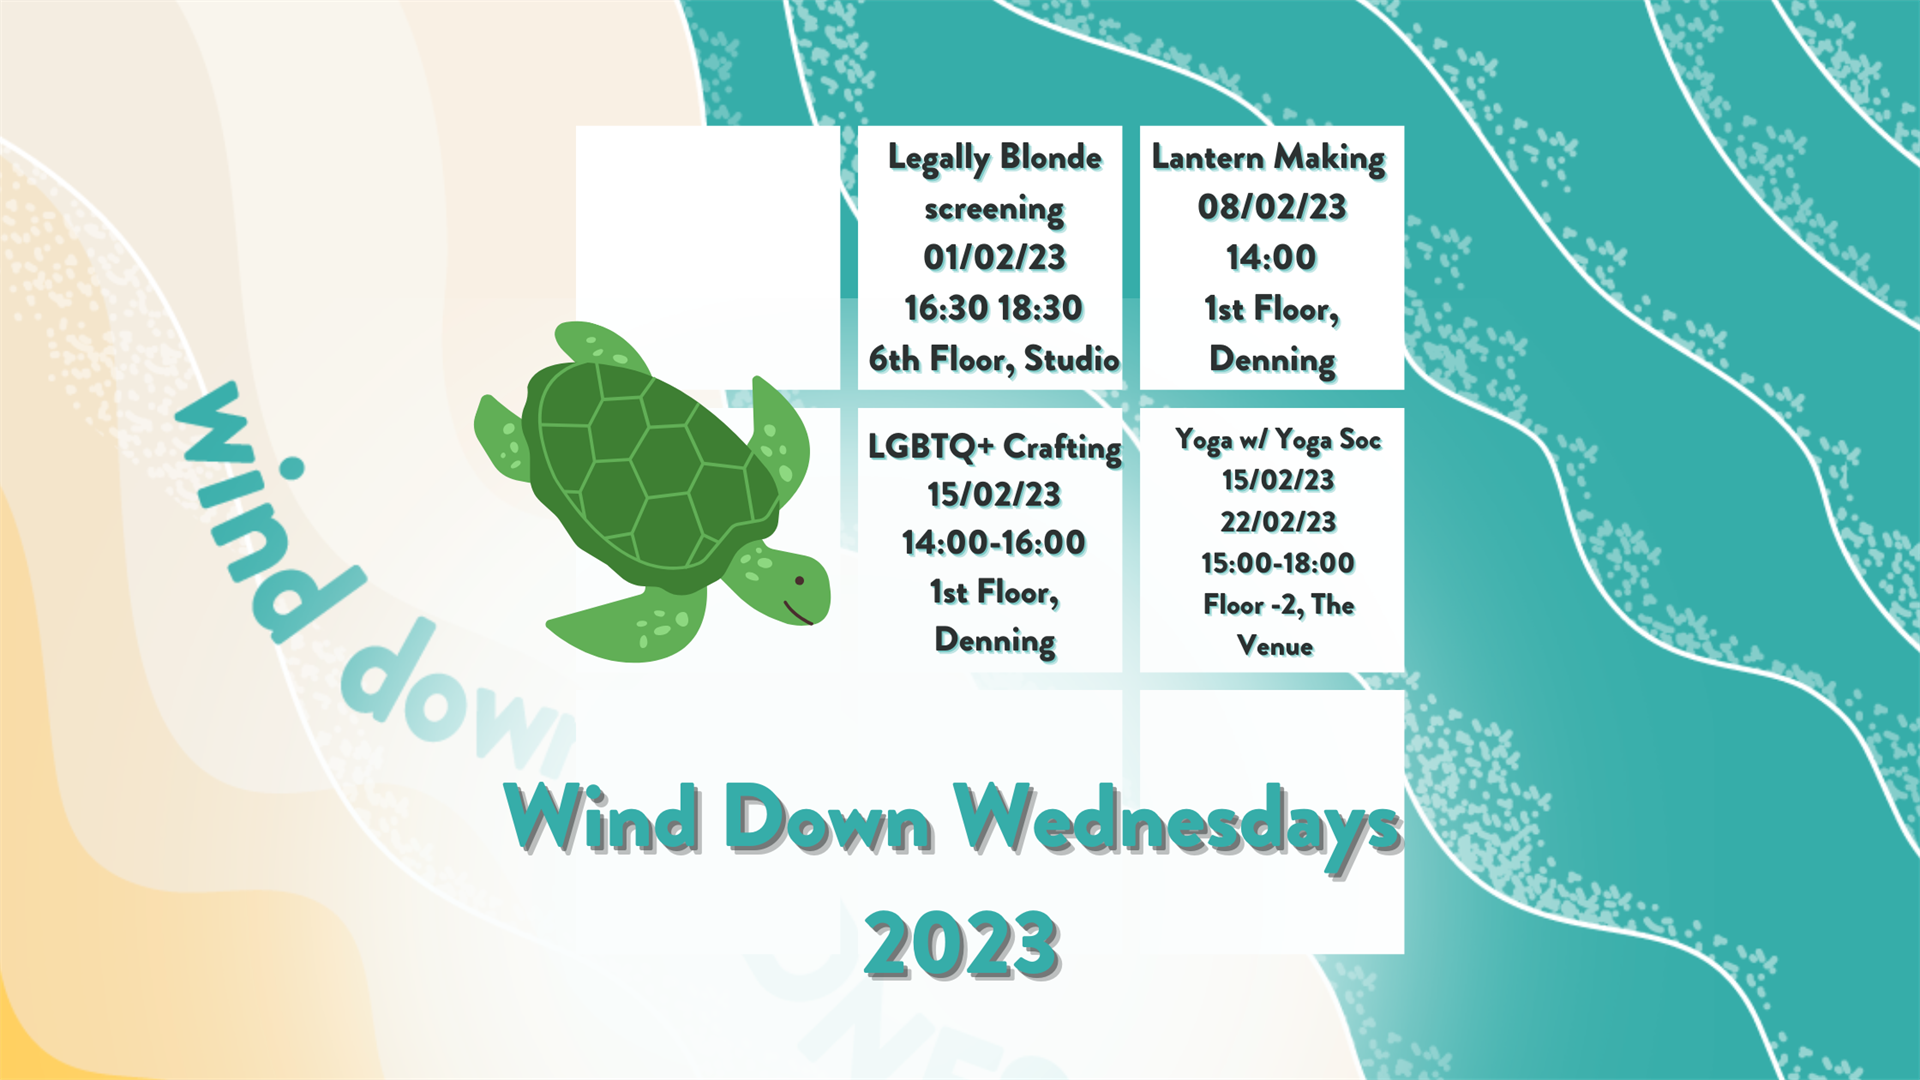 An illustration of a green turtle next to a 22 grid in each box there is text describing wdw events